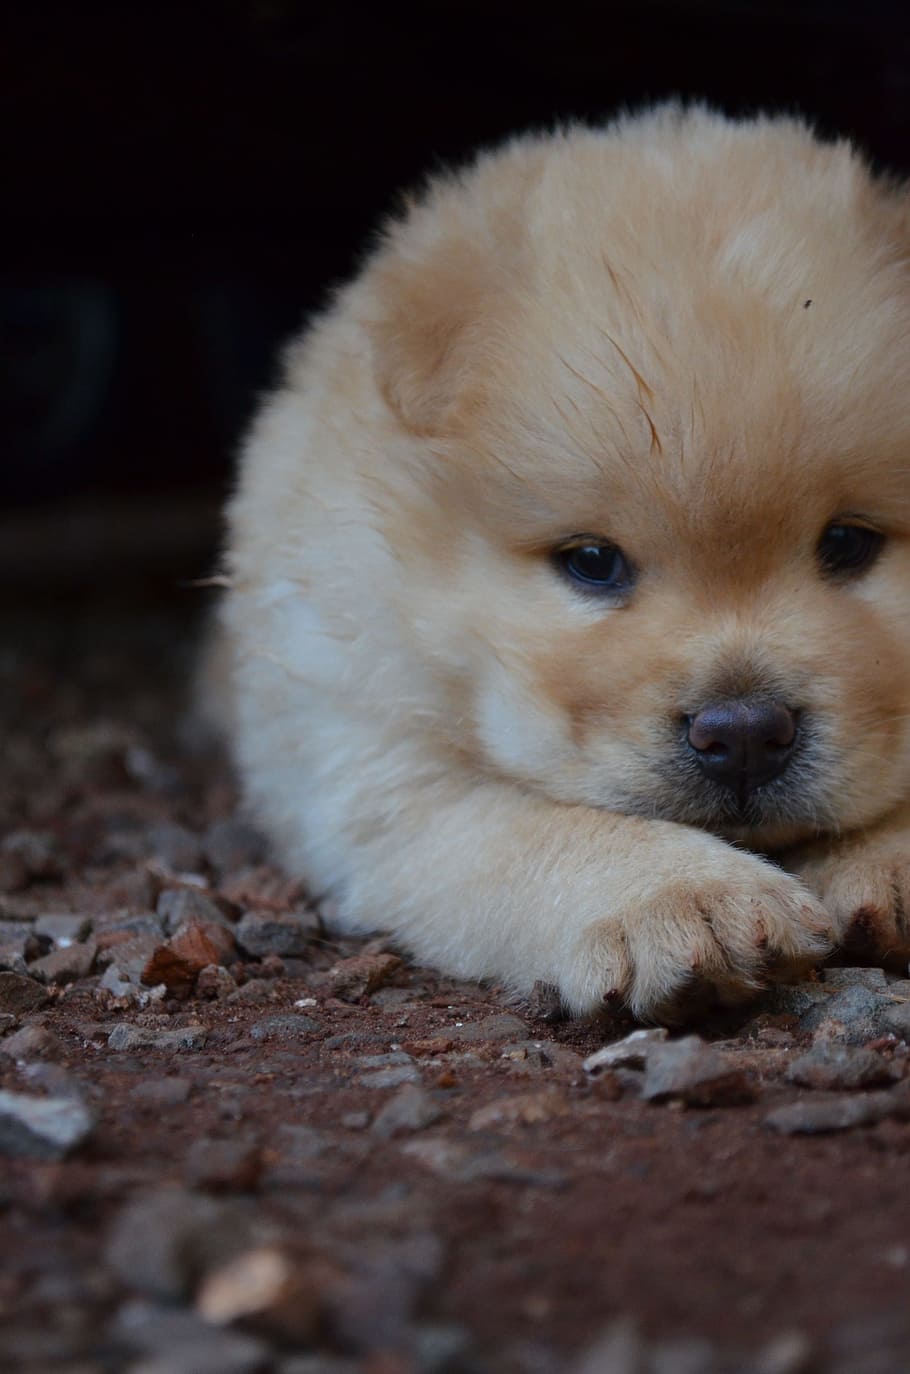 brown, chow chow puppy, lying, ground close-up photo, Puppy, Chow, Chow Chow, Chow-Chow, Pet, Dog, puppy